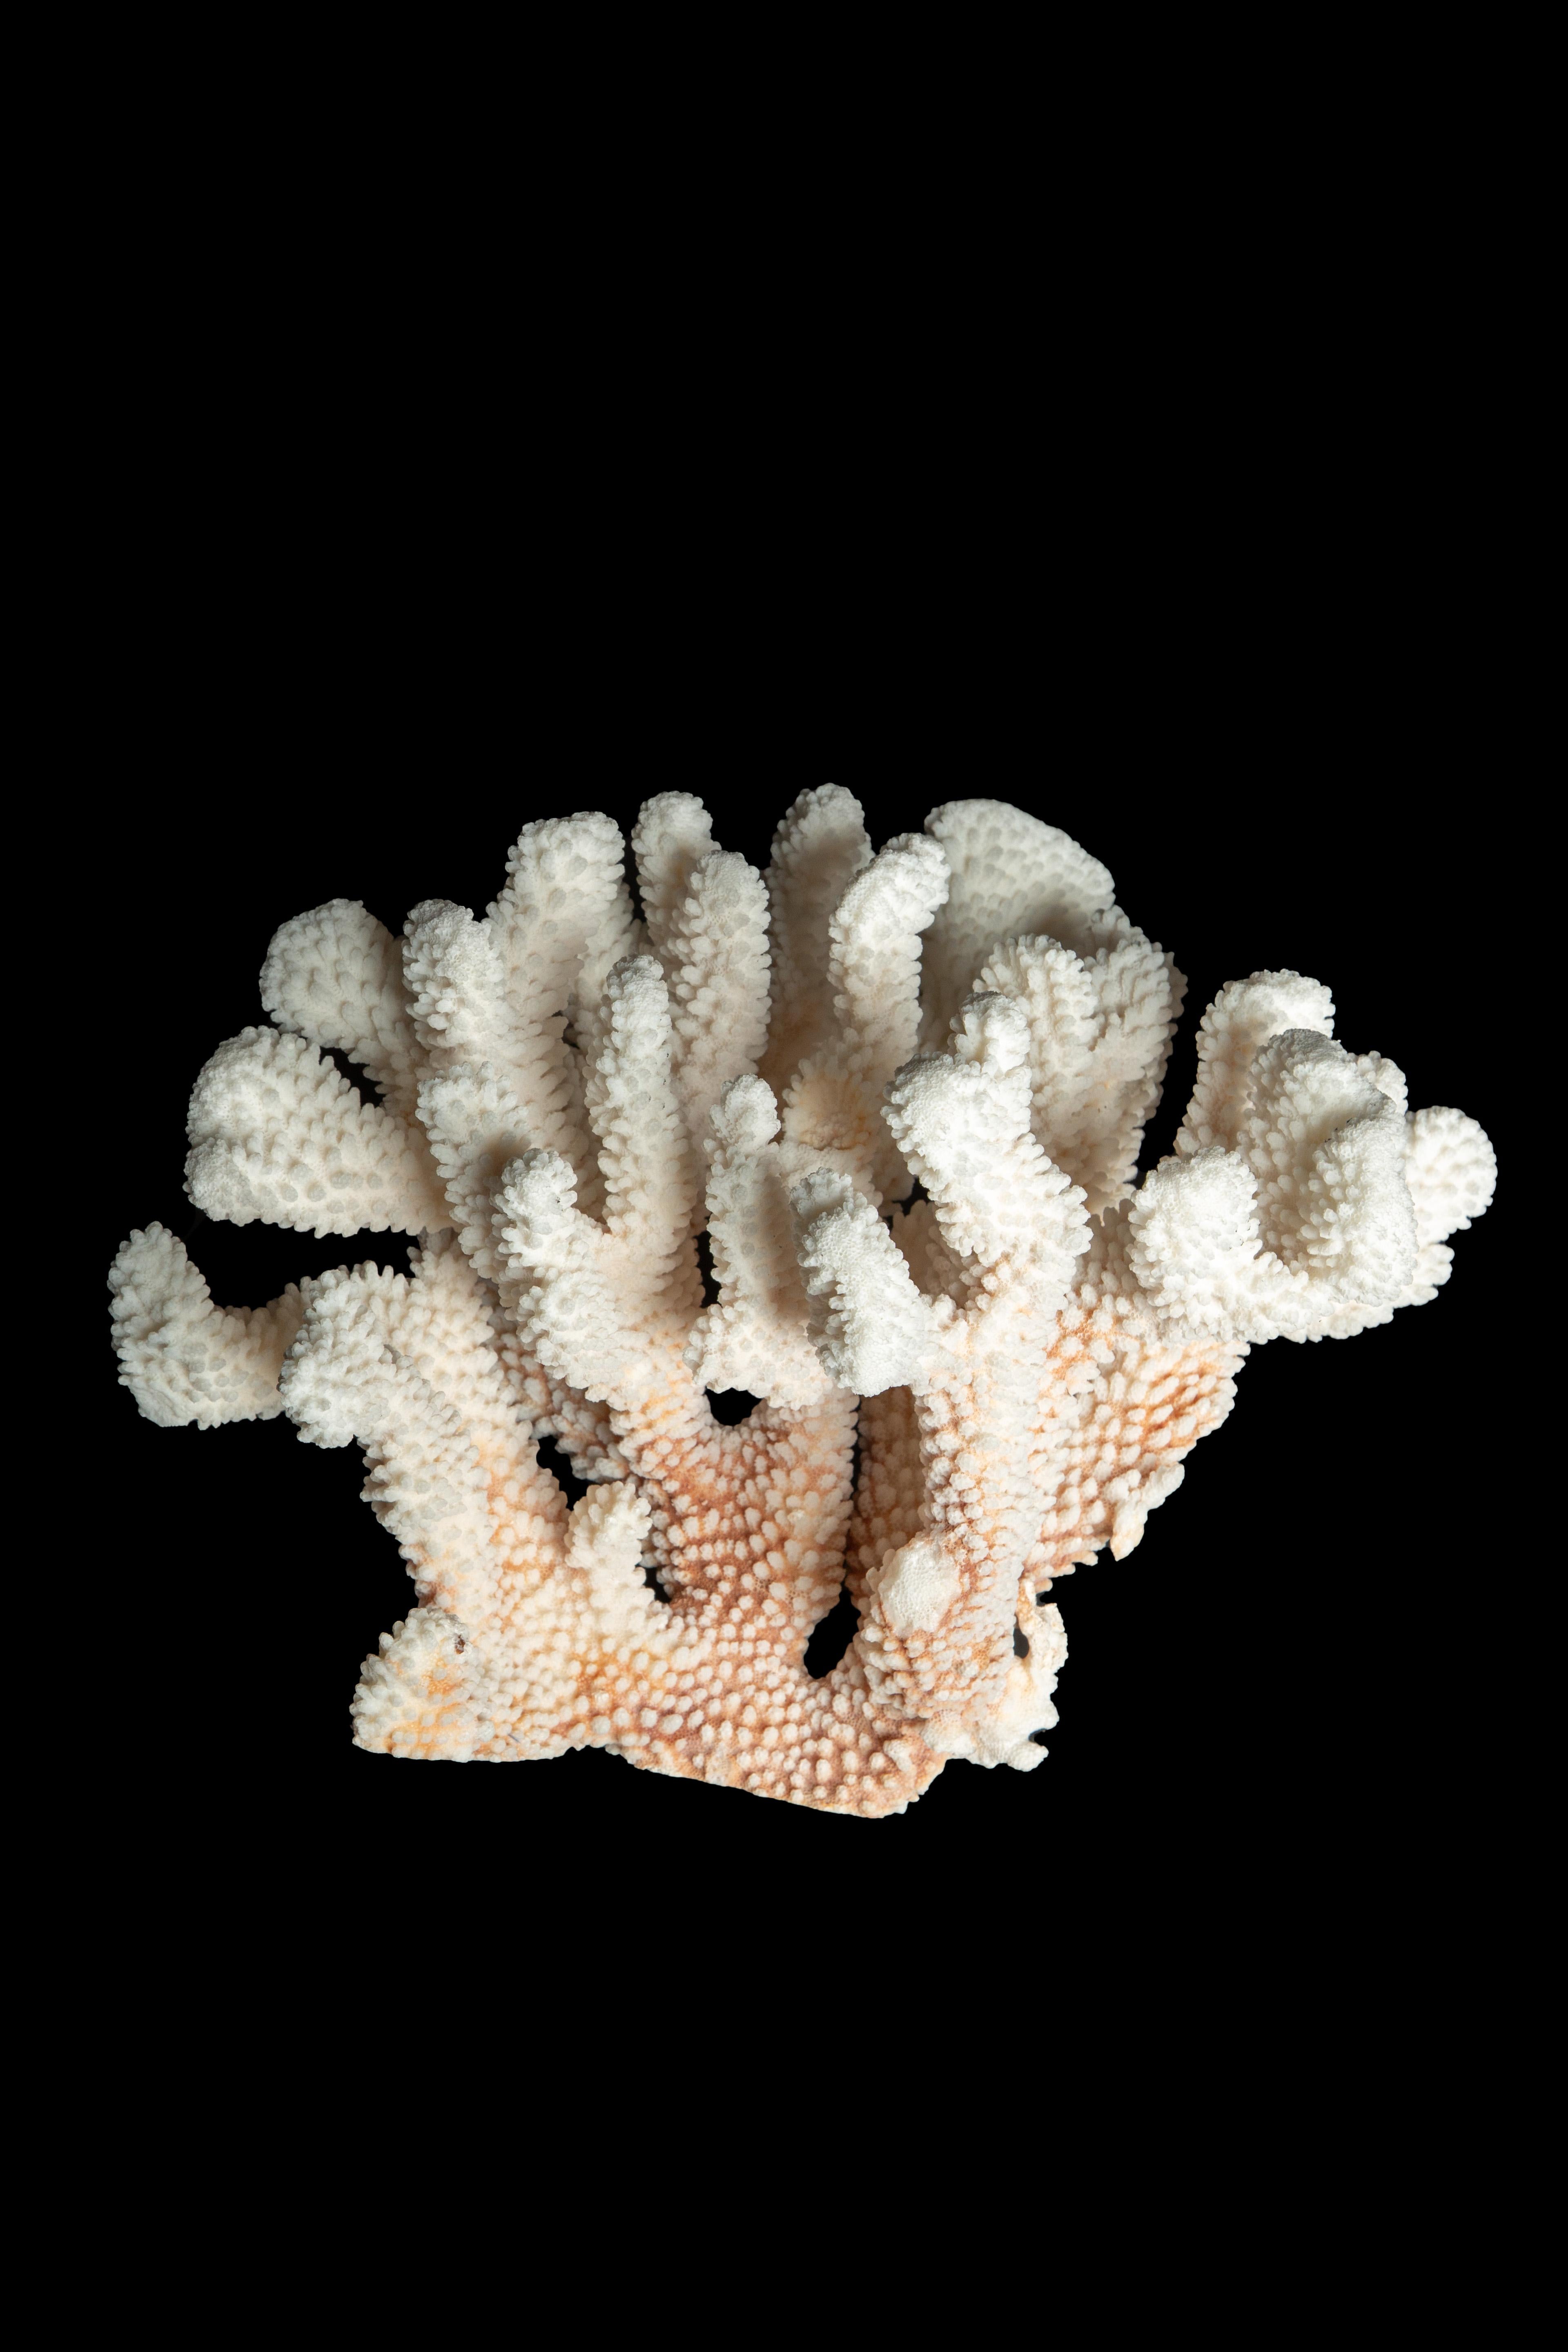 Table Mount Cauliflower Coral:

Measures: 13